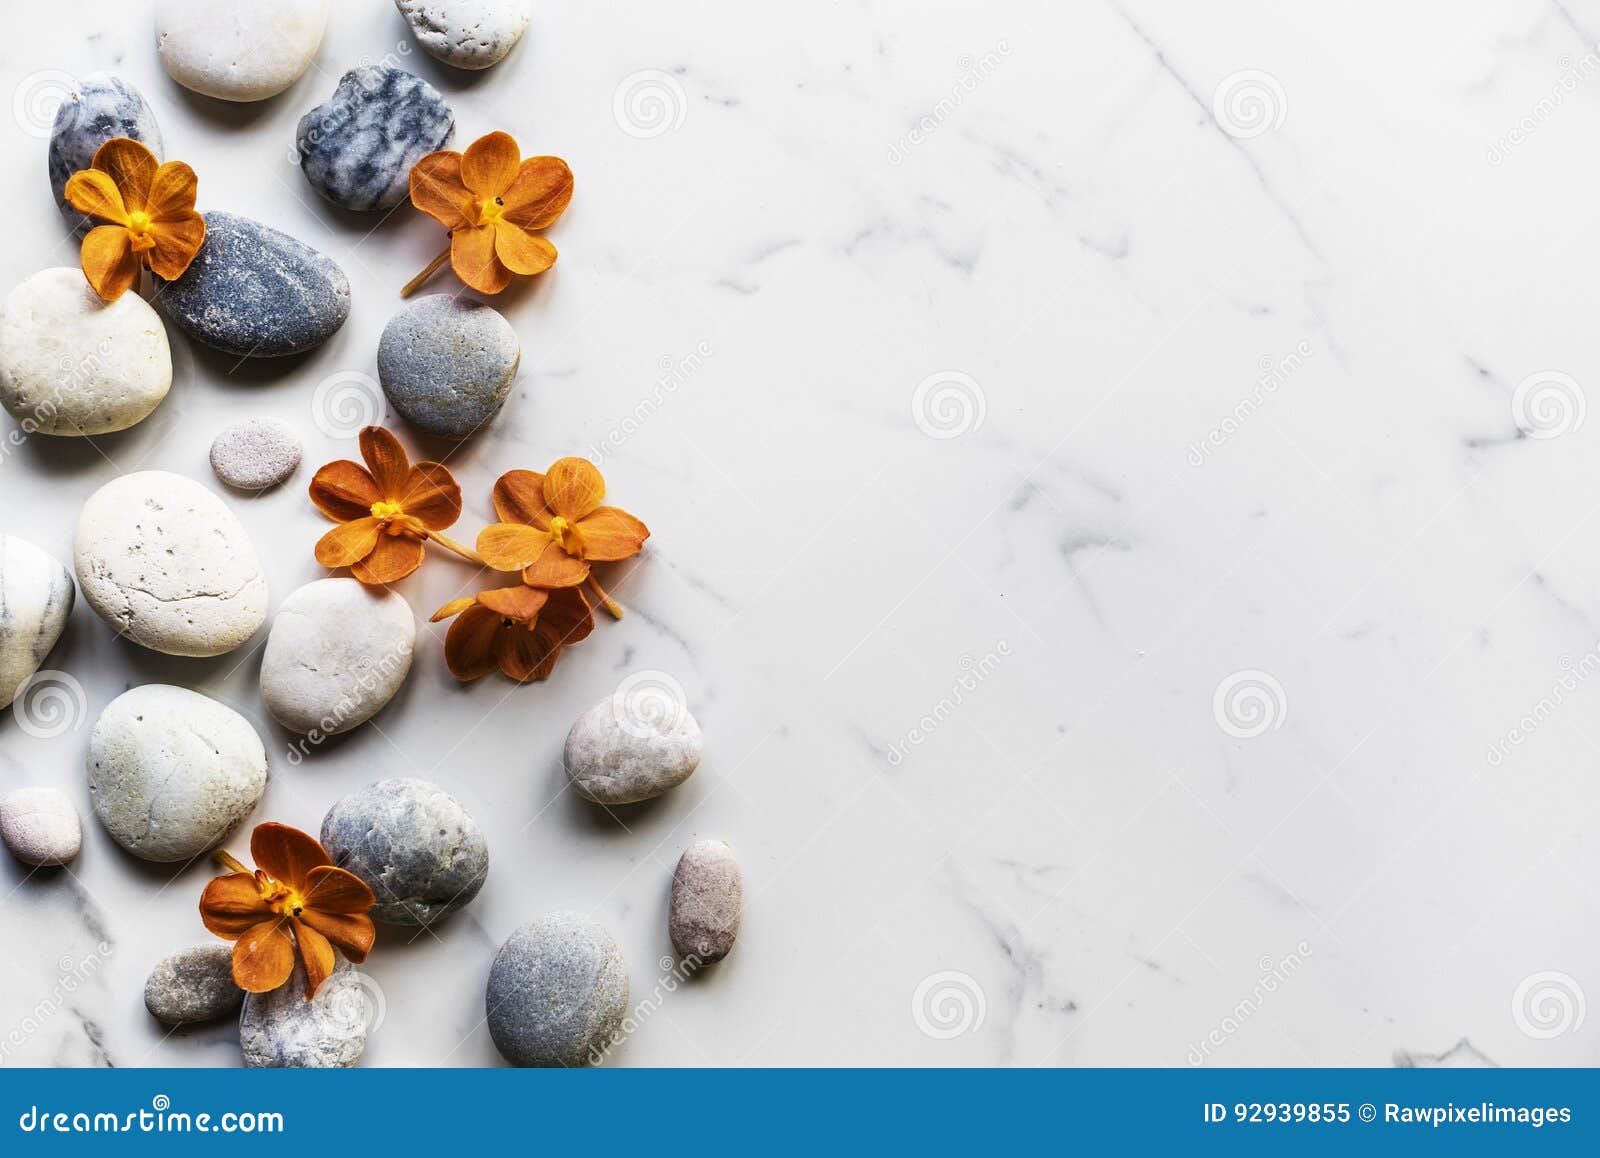 flower rock healthy aroma balance tranquility